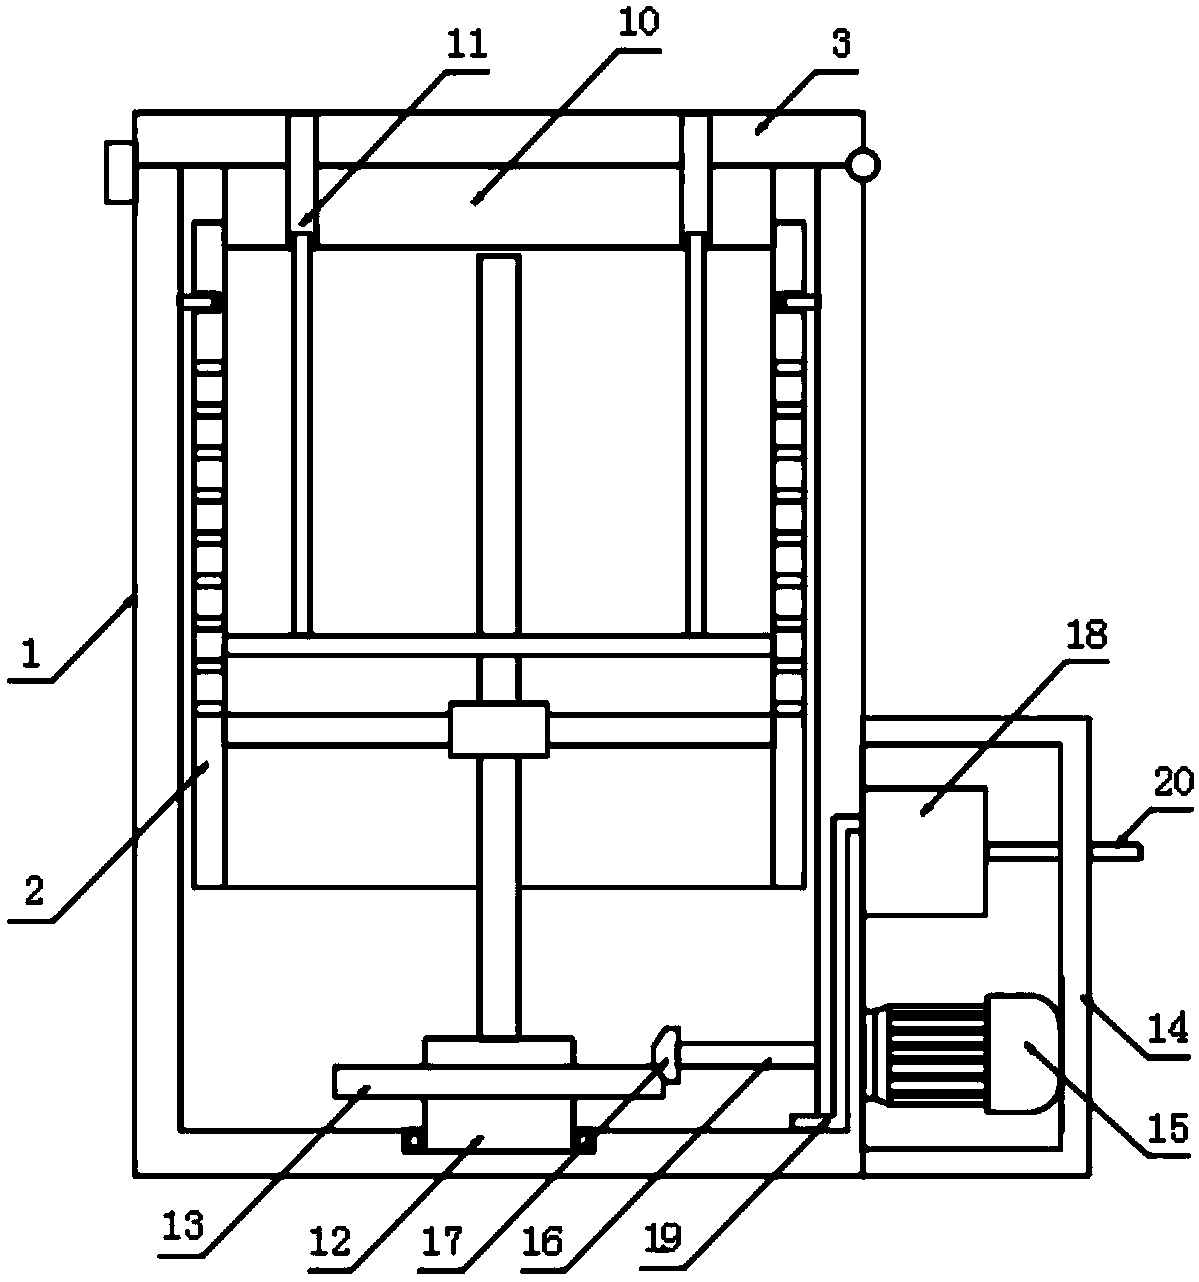 Efficient centrifugal dehydrator and method